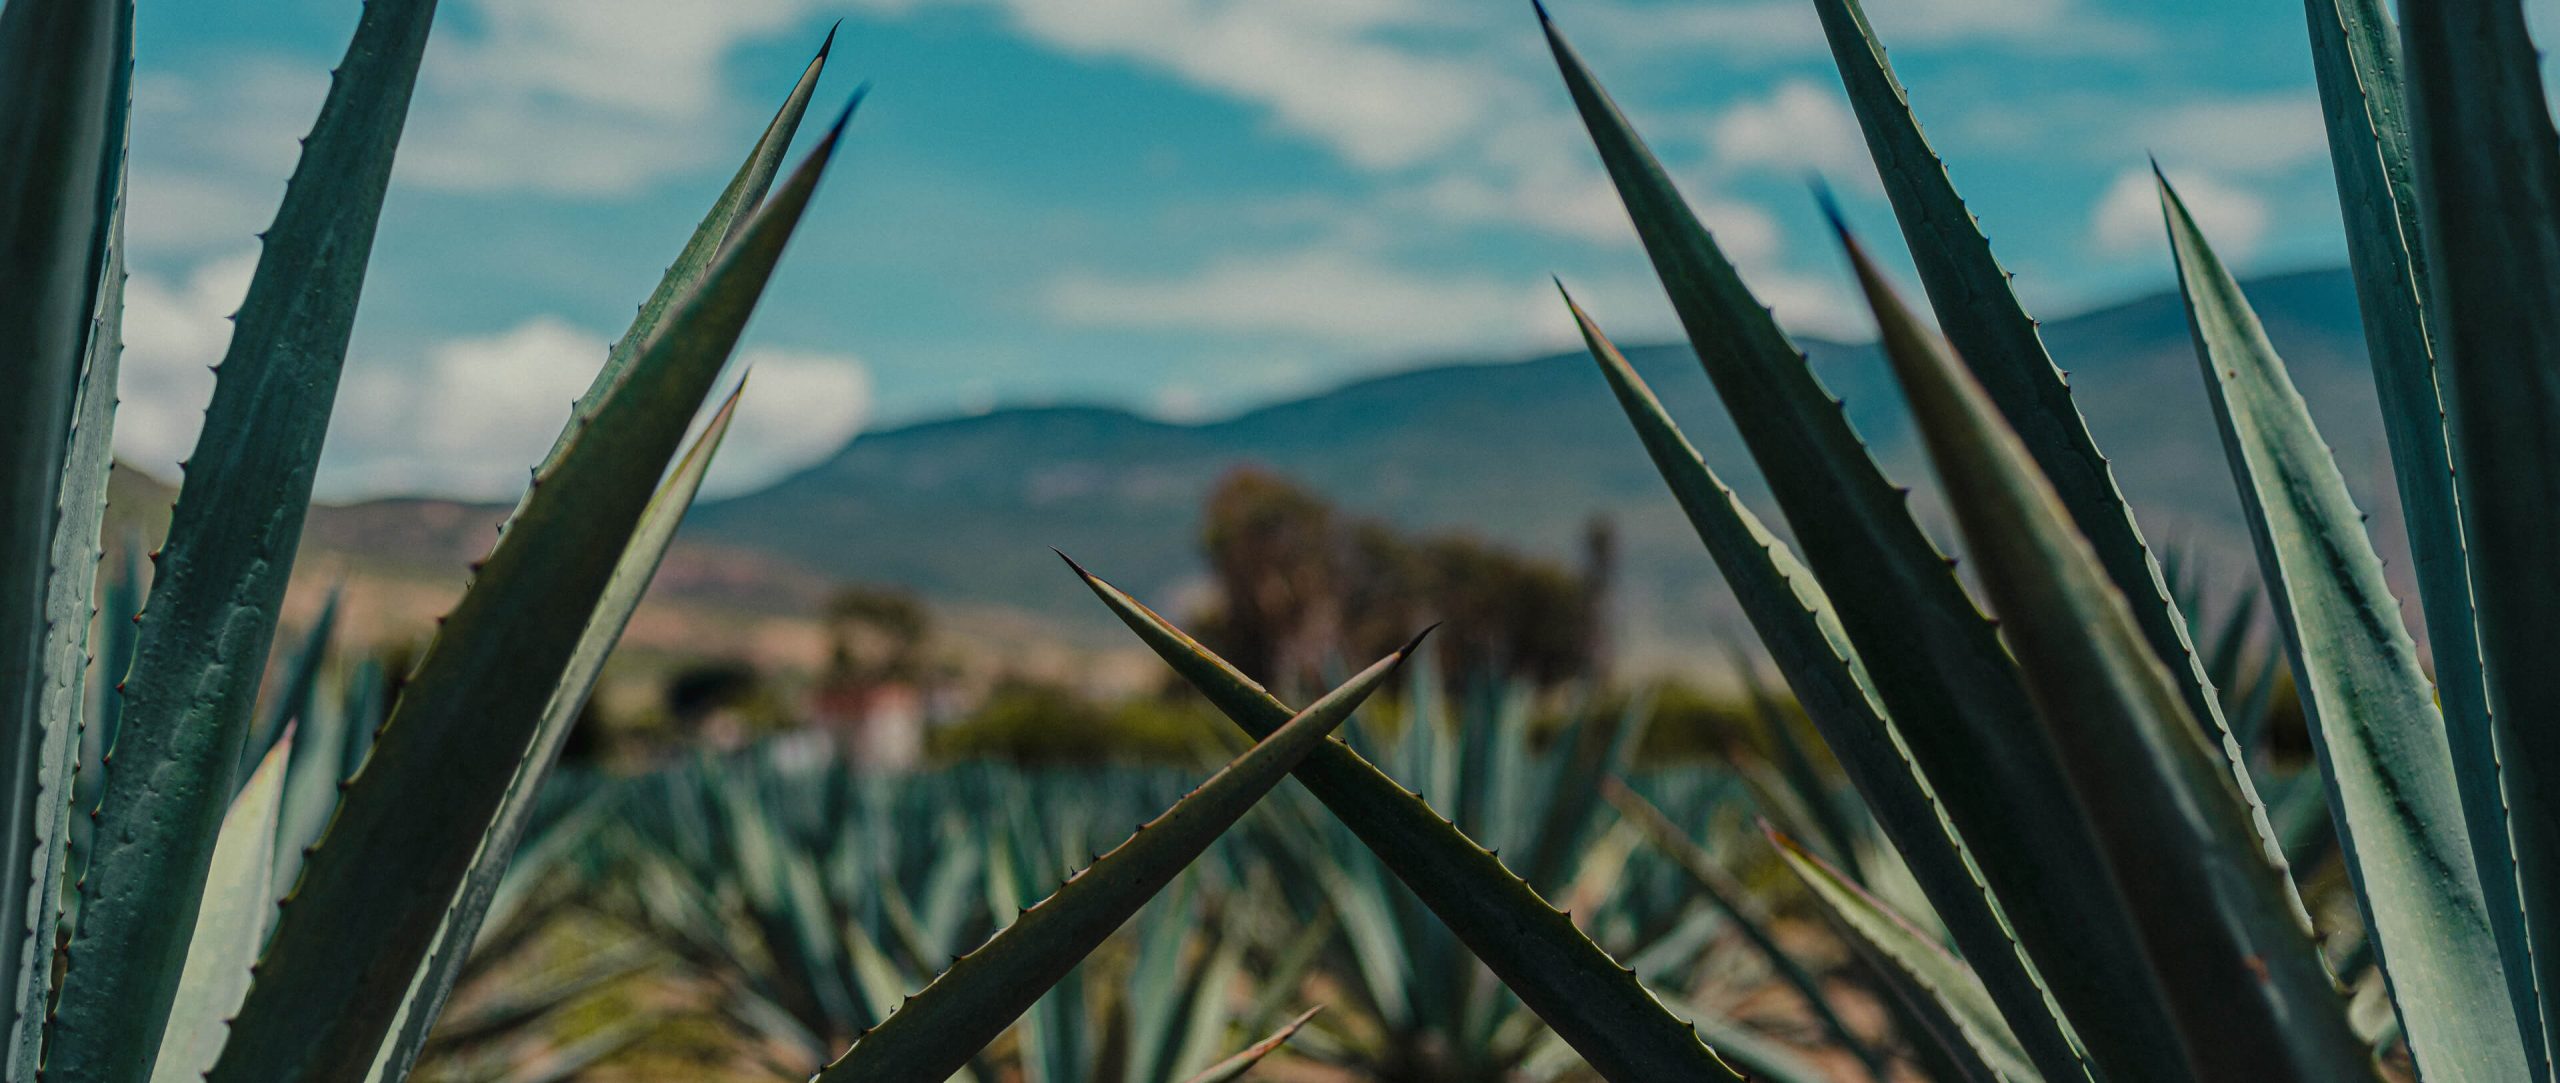 agave plant